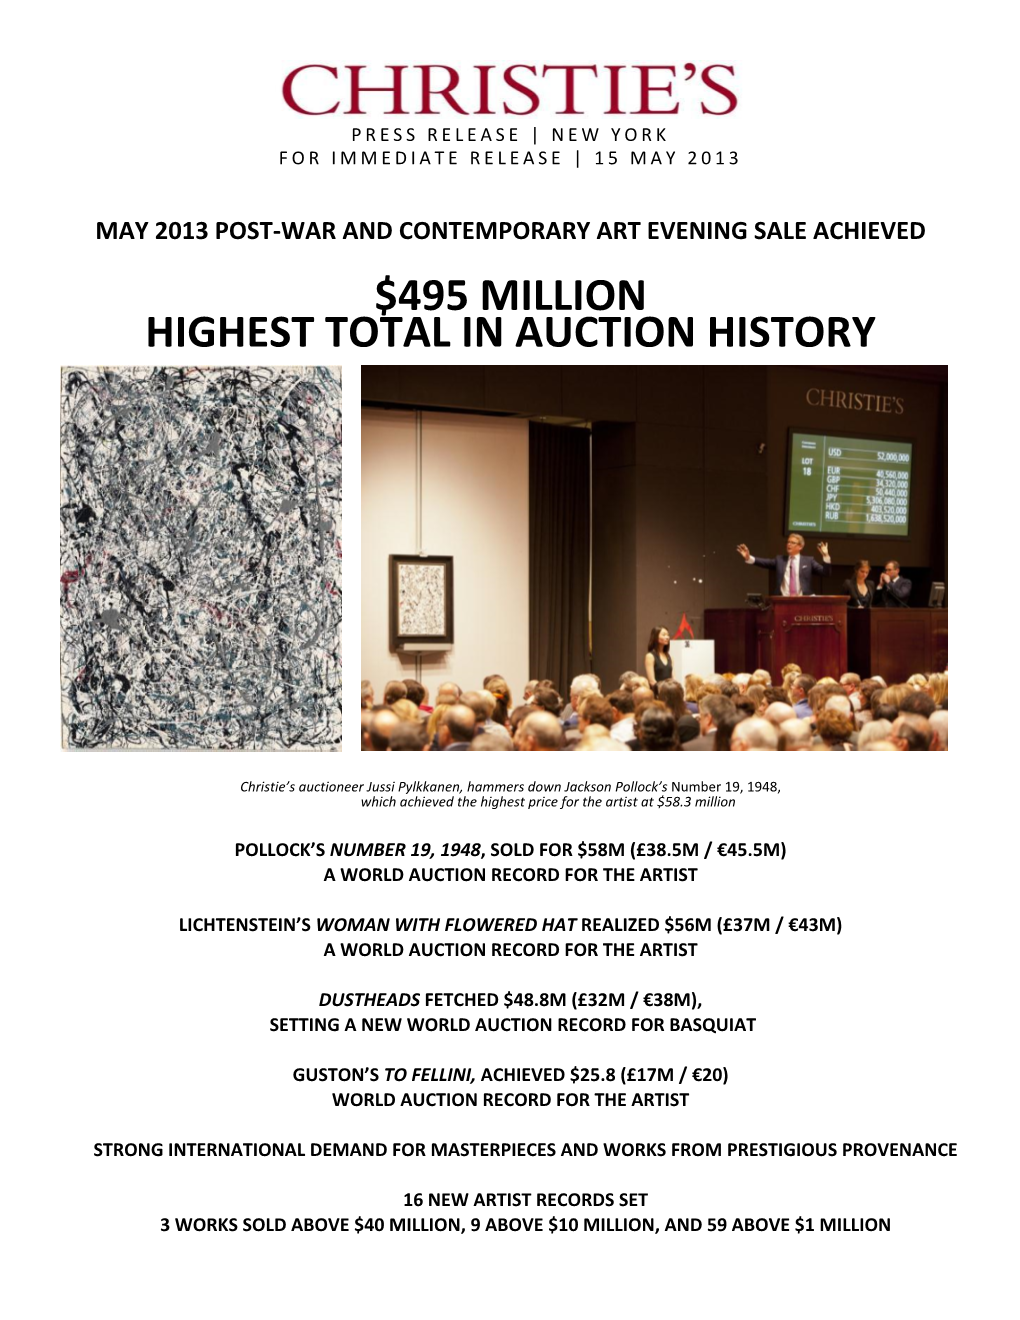 $495 Million Highest Total in Auction History